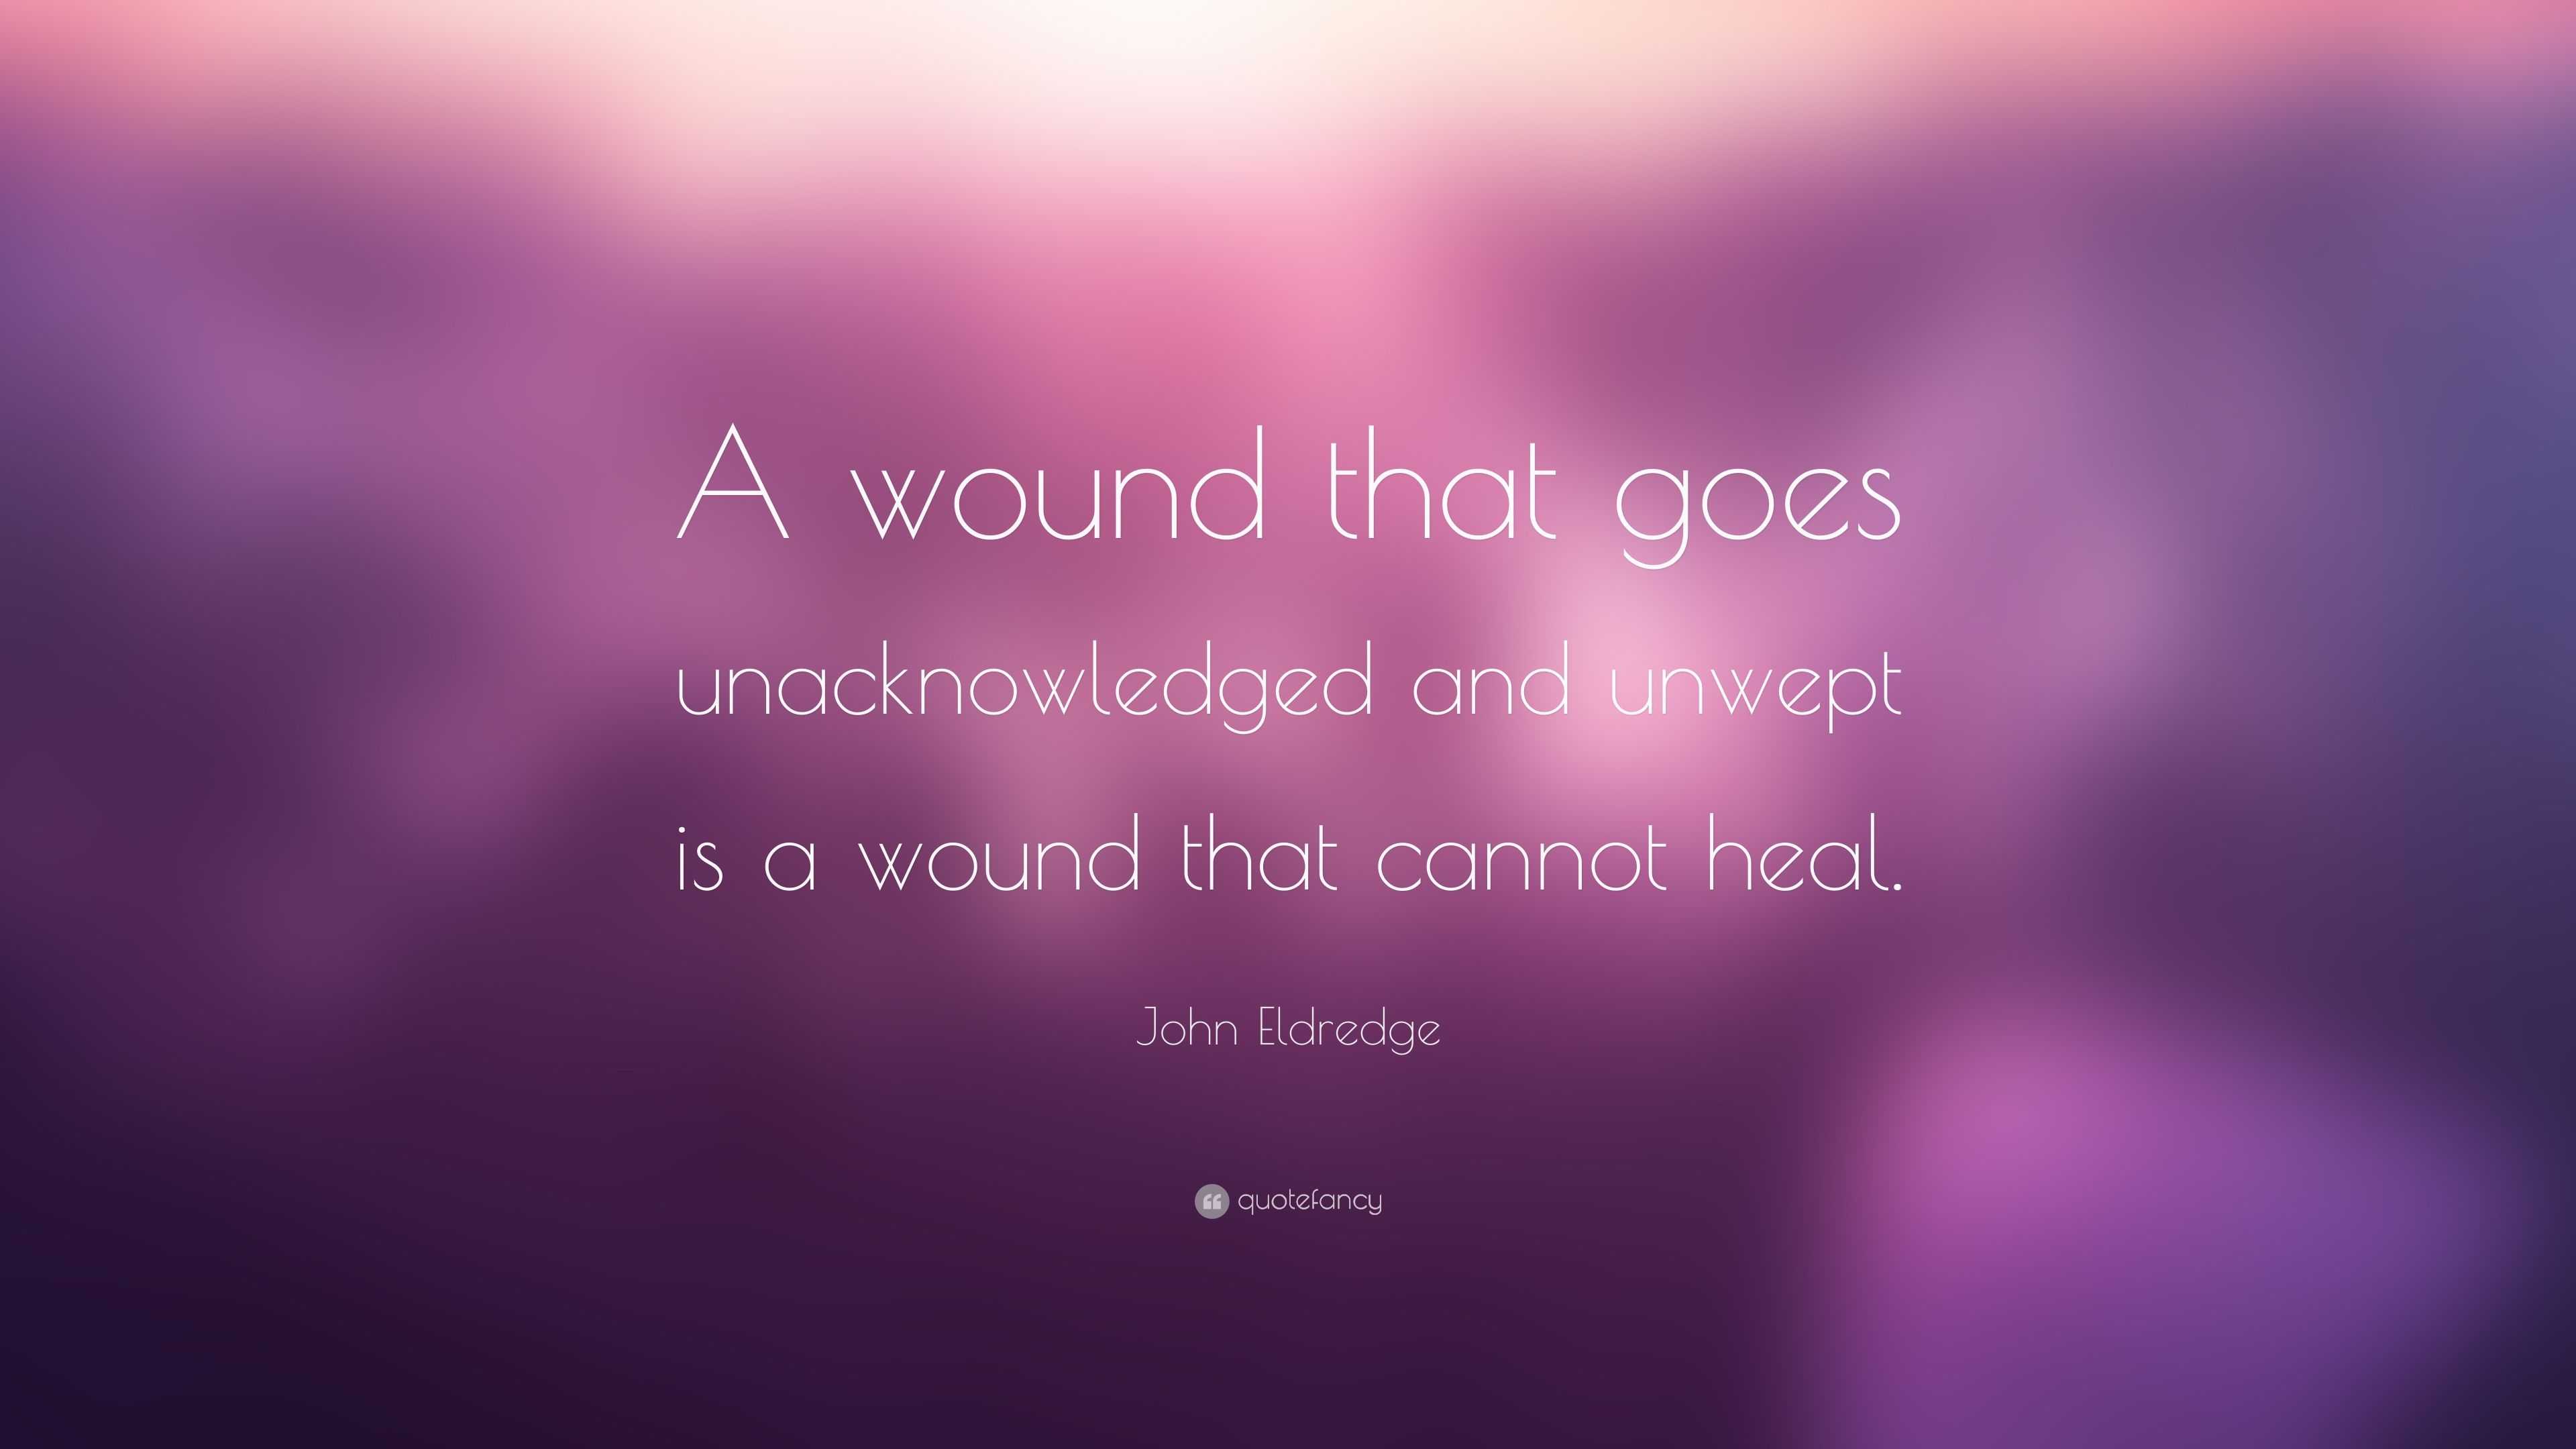 John Eldredge Quote: "A wound that goes unacknowledged and unwept is a wound that cannot heal."